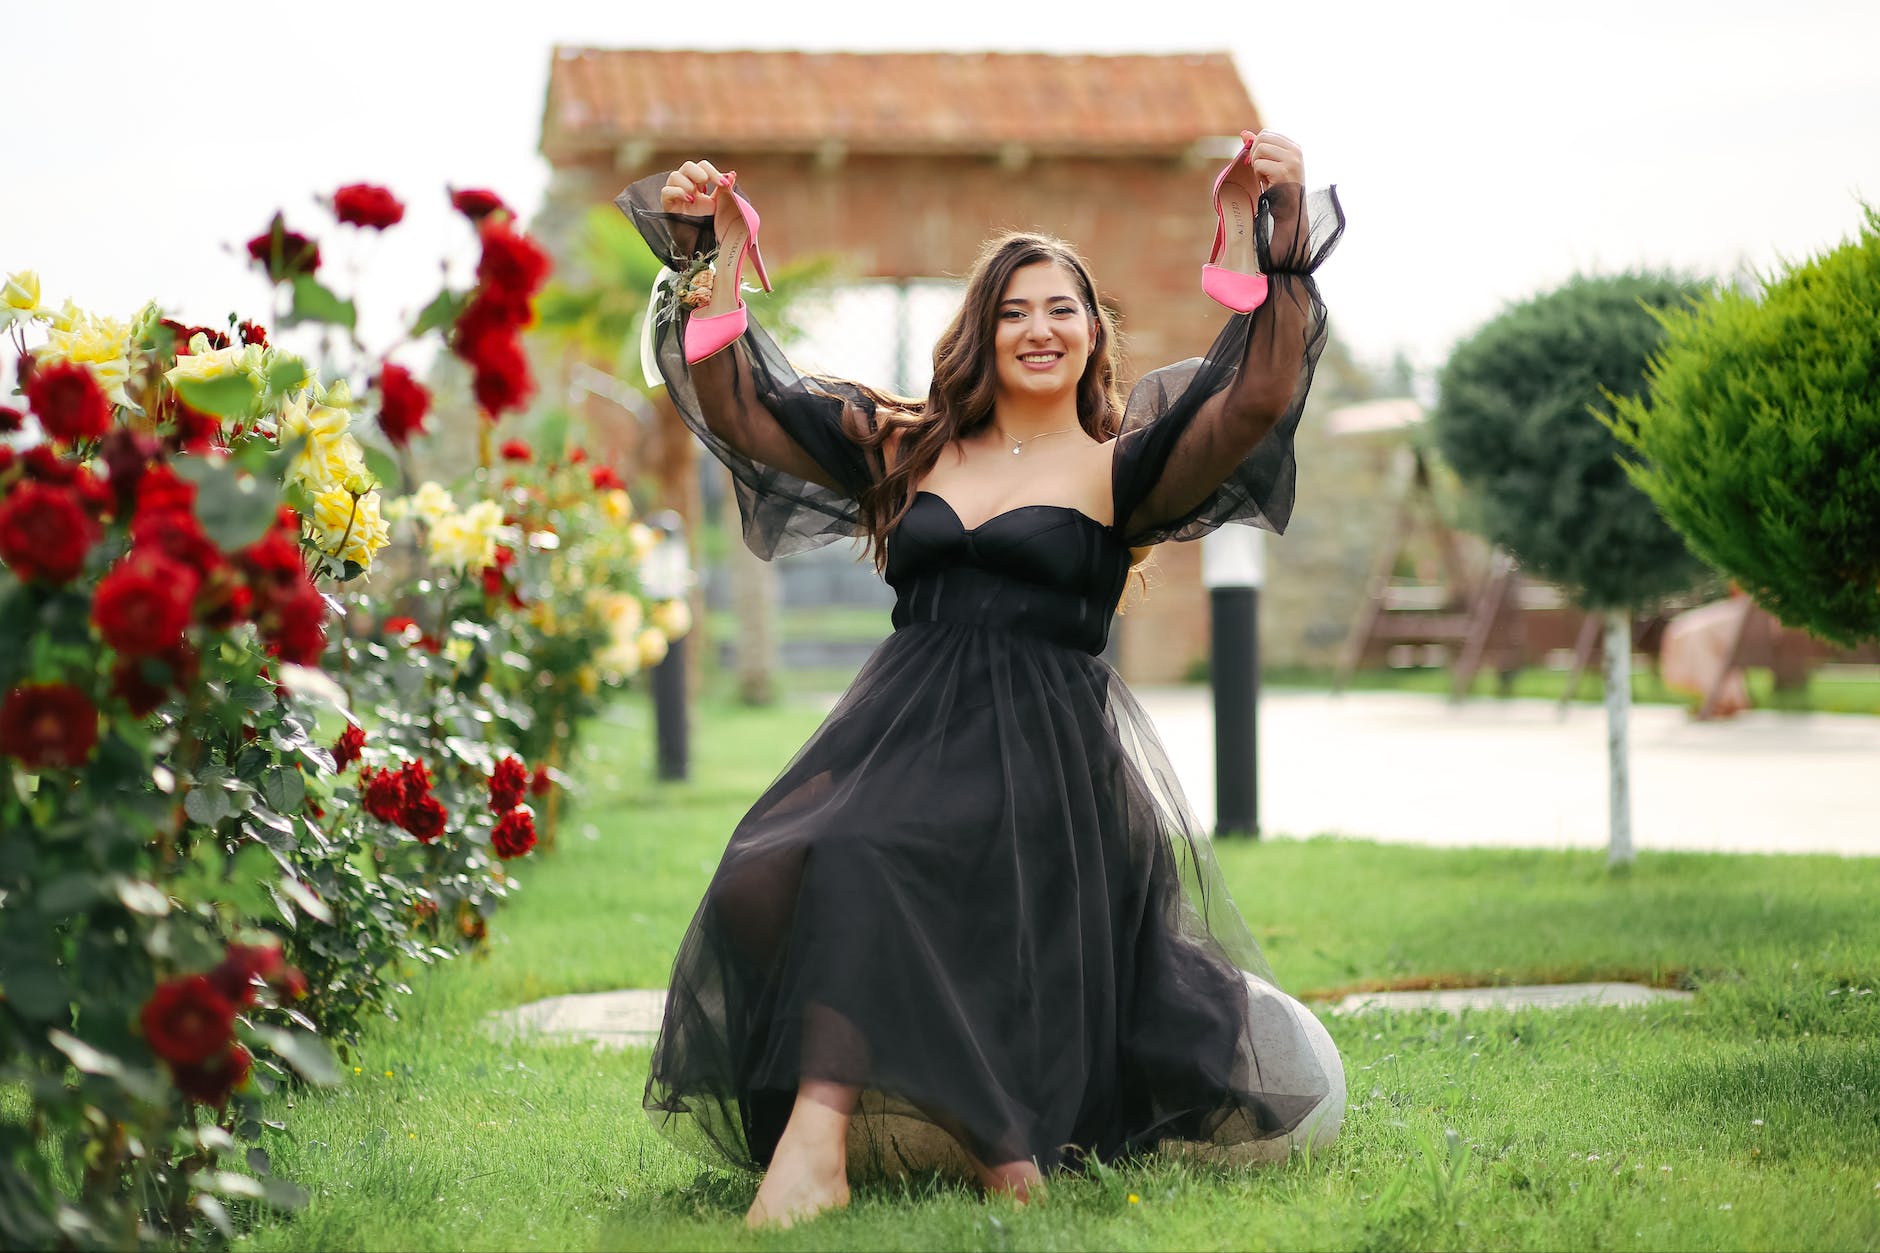 young woman in a black dress sitting in the garden and holding her shoes up